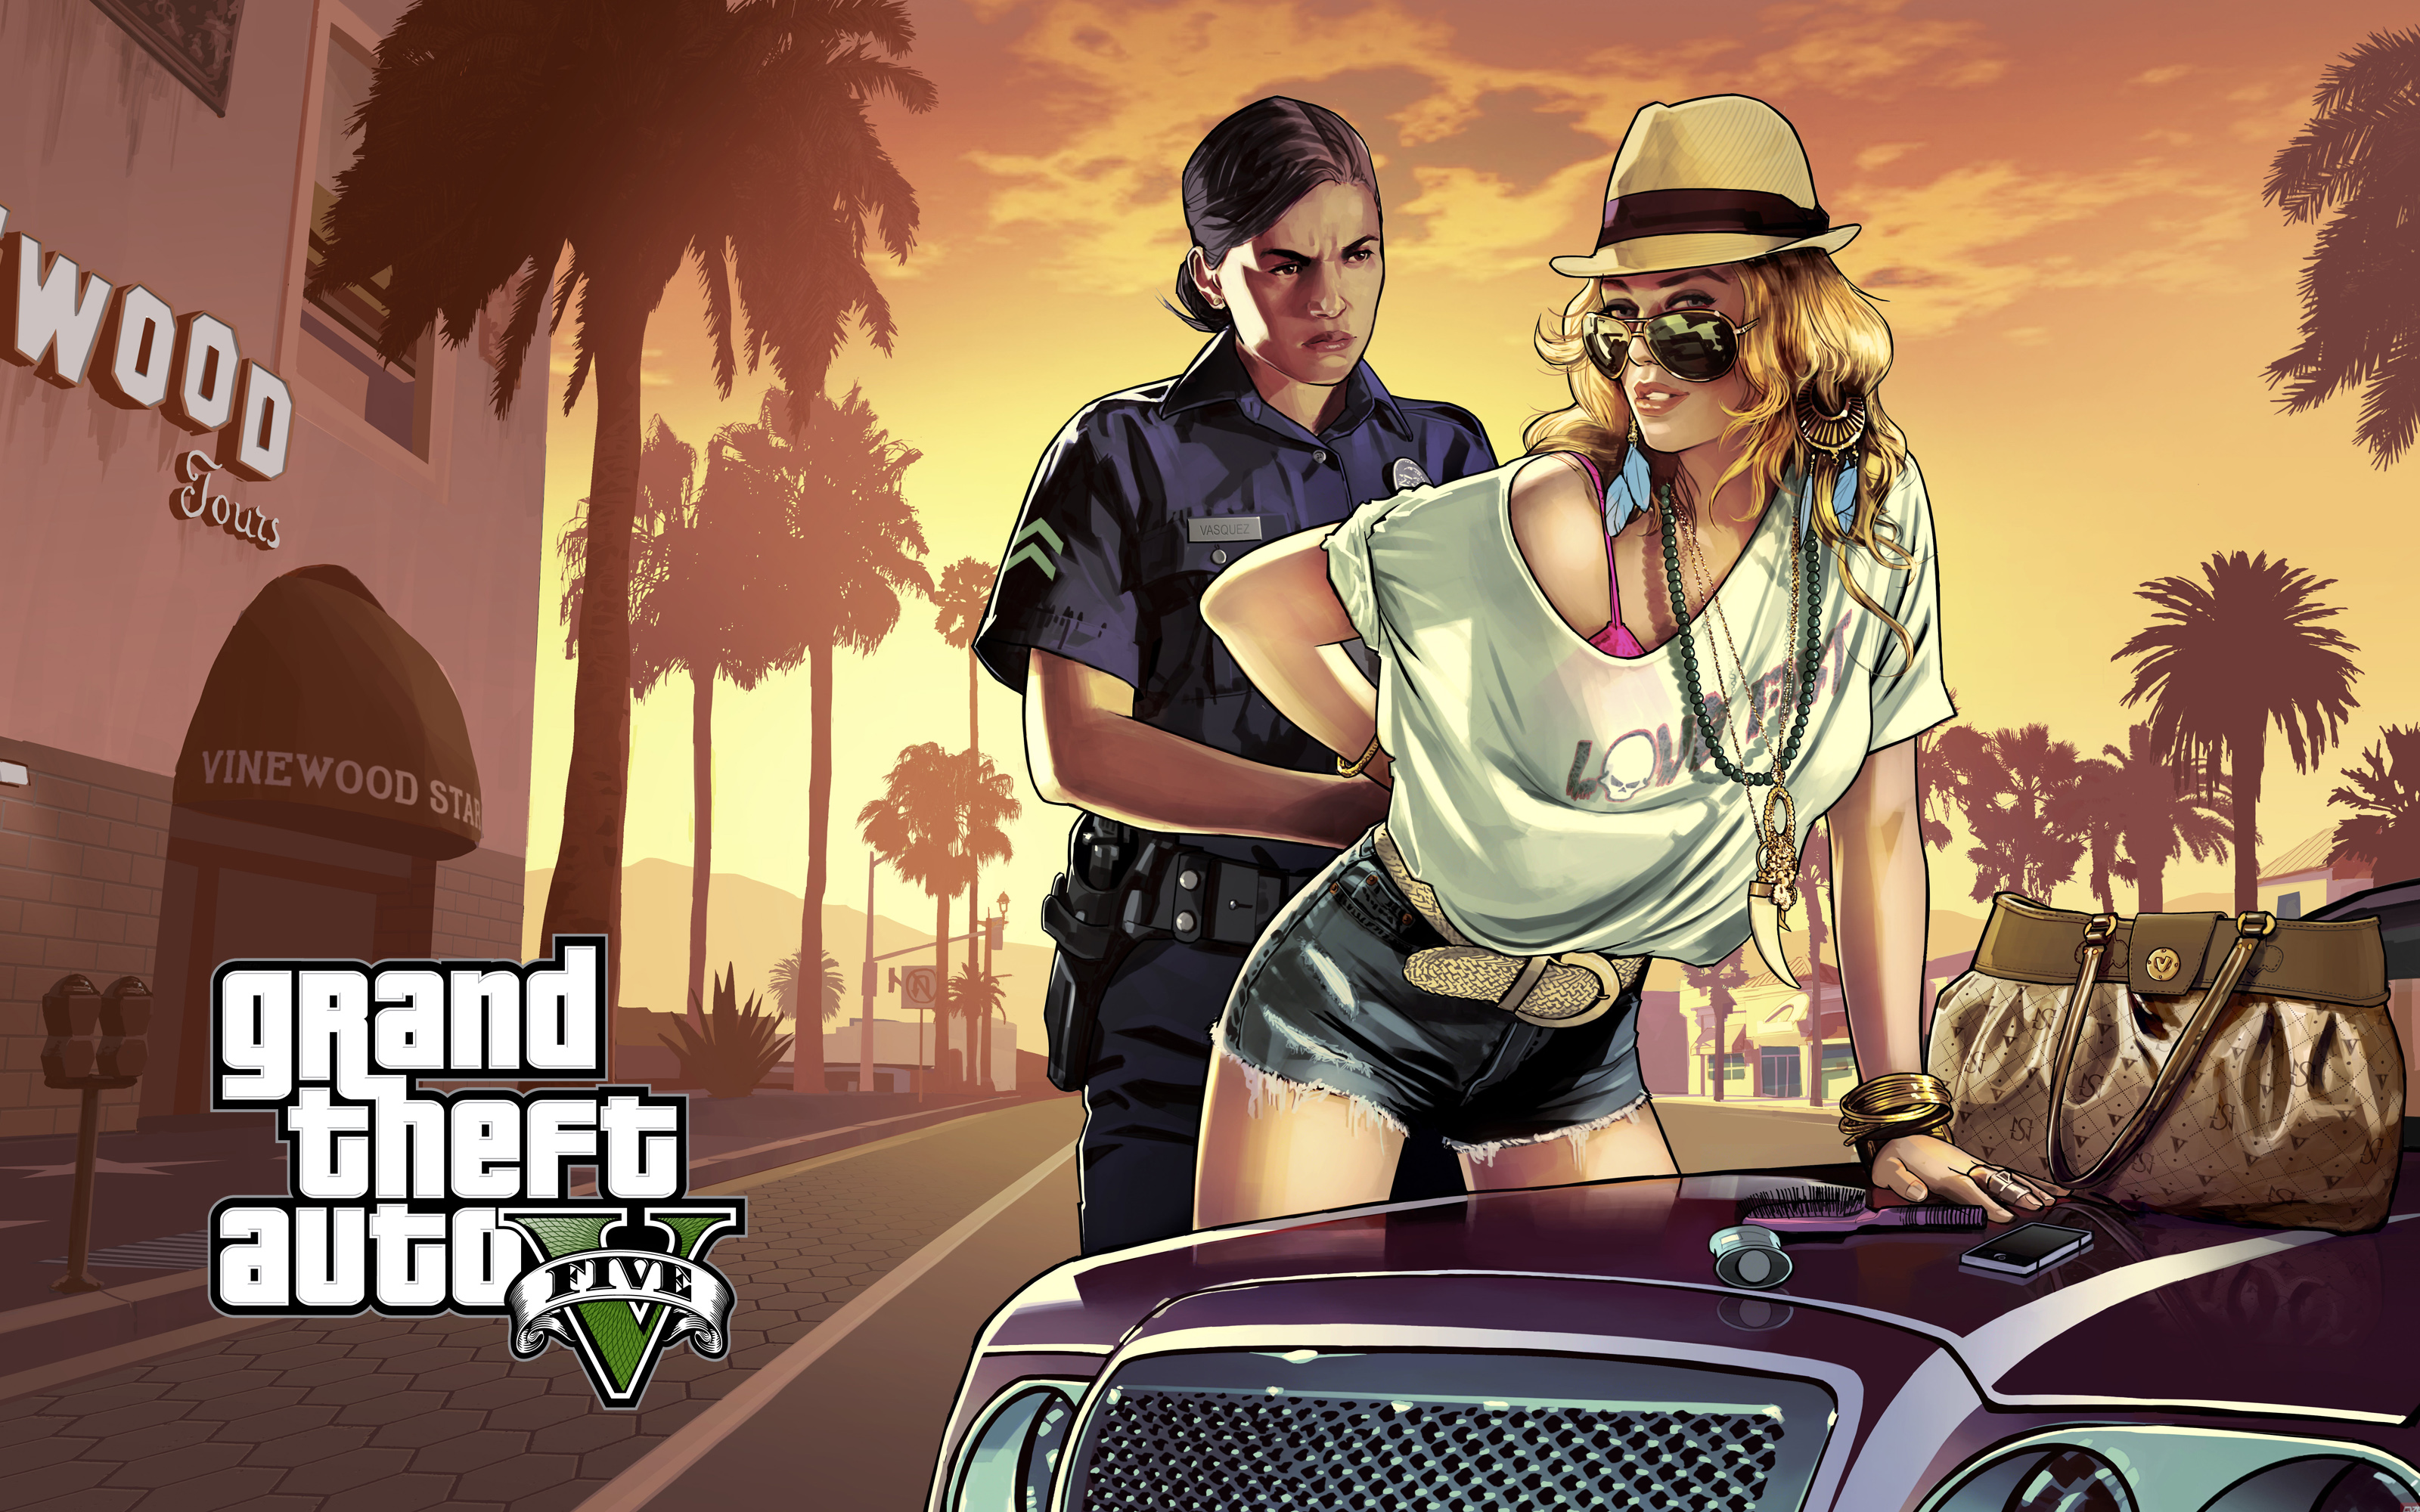 FINAL STAGE - GTA V para PC GRATIS en Epic Store gogogogogog  🥵🥵🥵🥵🥵🥵🥵🥵🥵🥵😠😠😠😠😠😠😠😠😠😠😠😠😠 The Grand Theft Auto V:  Premium Edition includes the complete GTAV story, Grand Theft Auto Online  and all existing